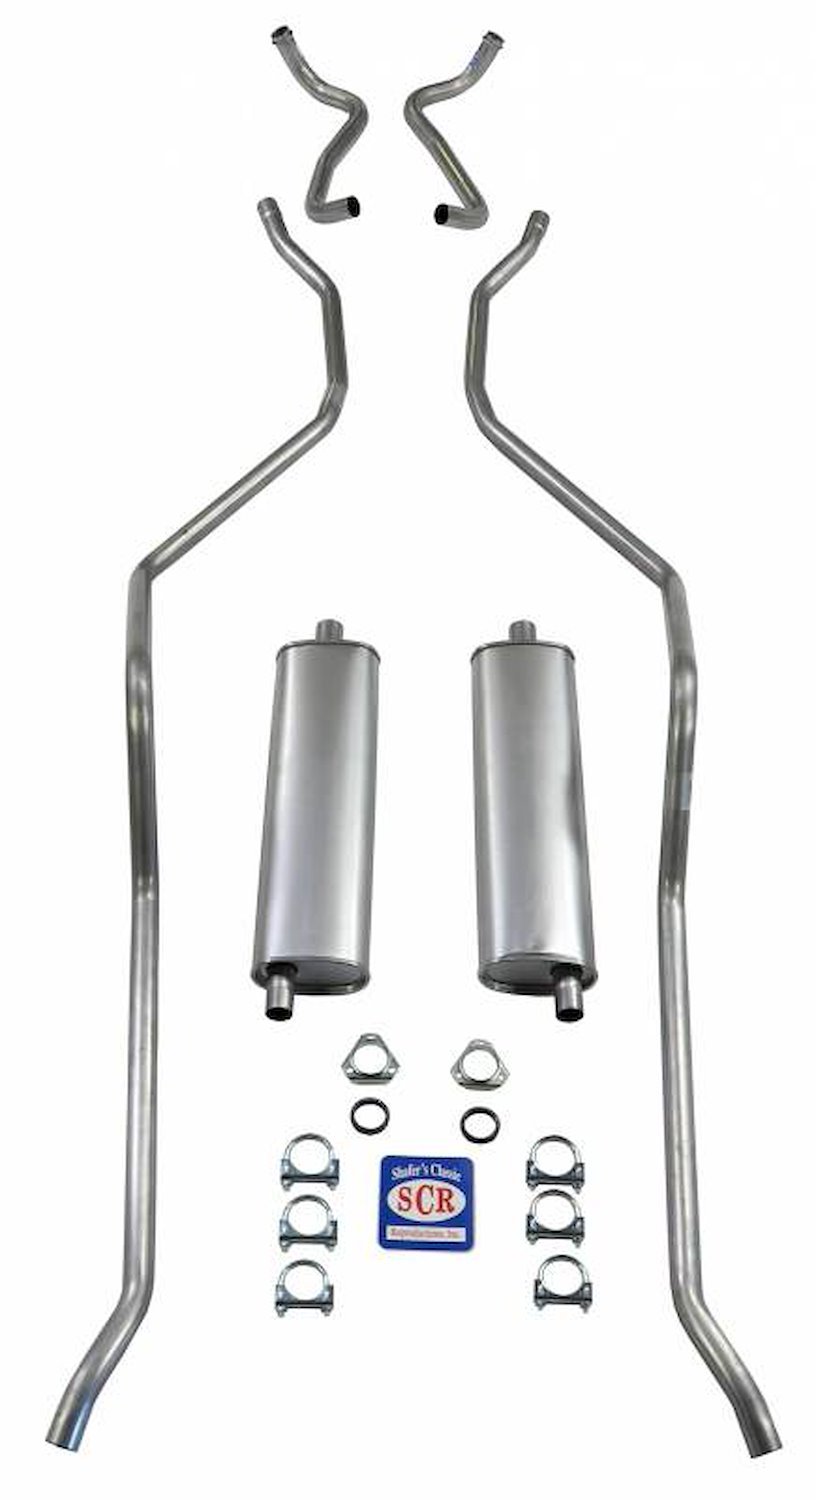 73070S 1959 El Camino & SW exc. 9-Pass. Exhaust System 8-cyl 348 Dual Exhaust, 304 Stainless Steel